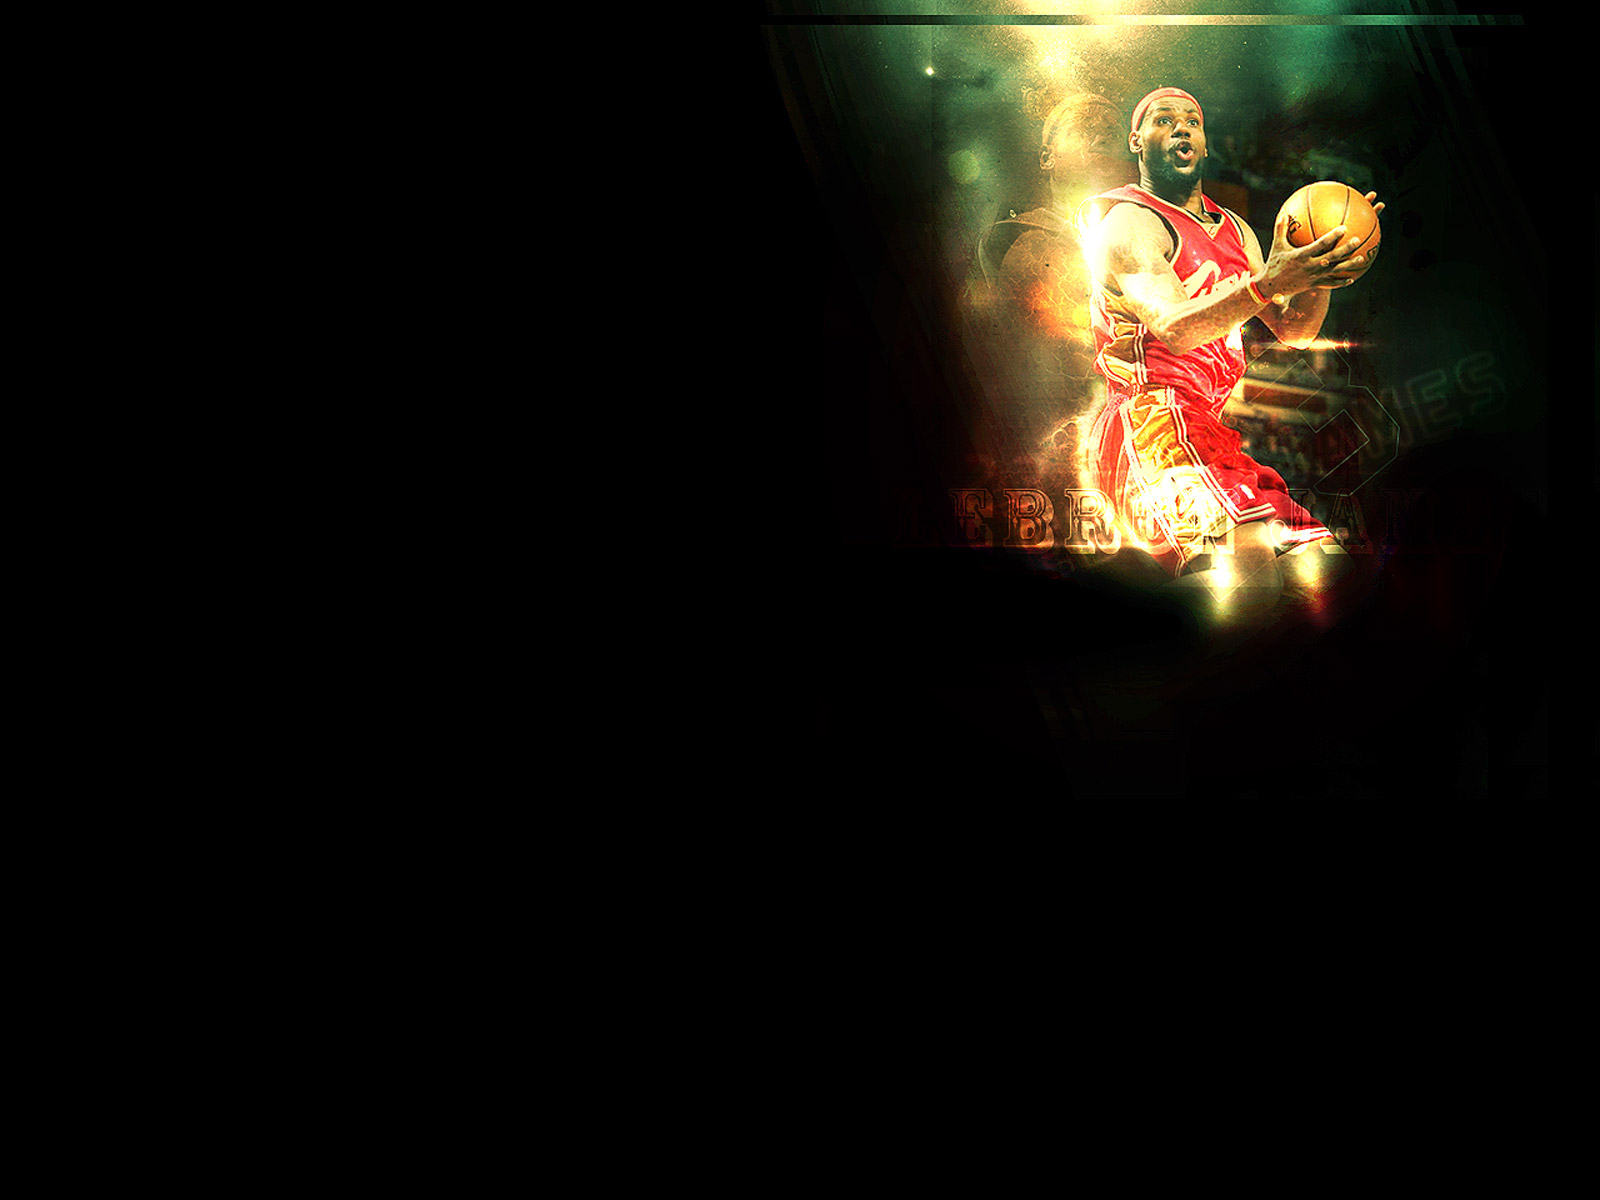 I have new wallpaper of the King James for today :) Lebron is going for slam 